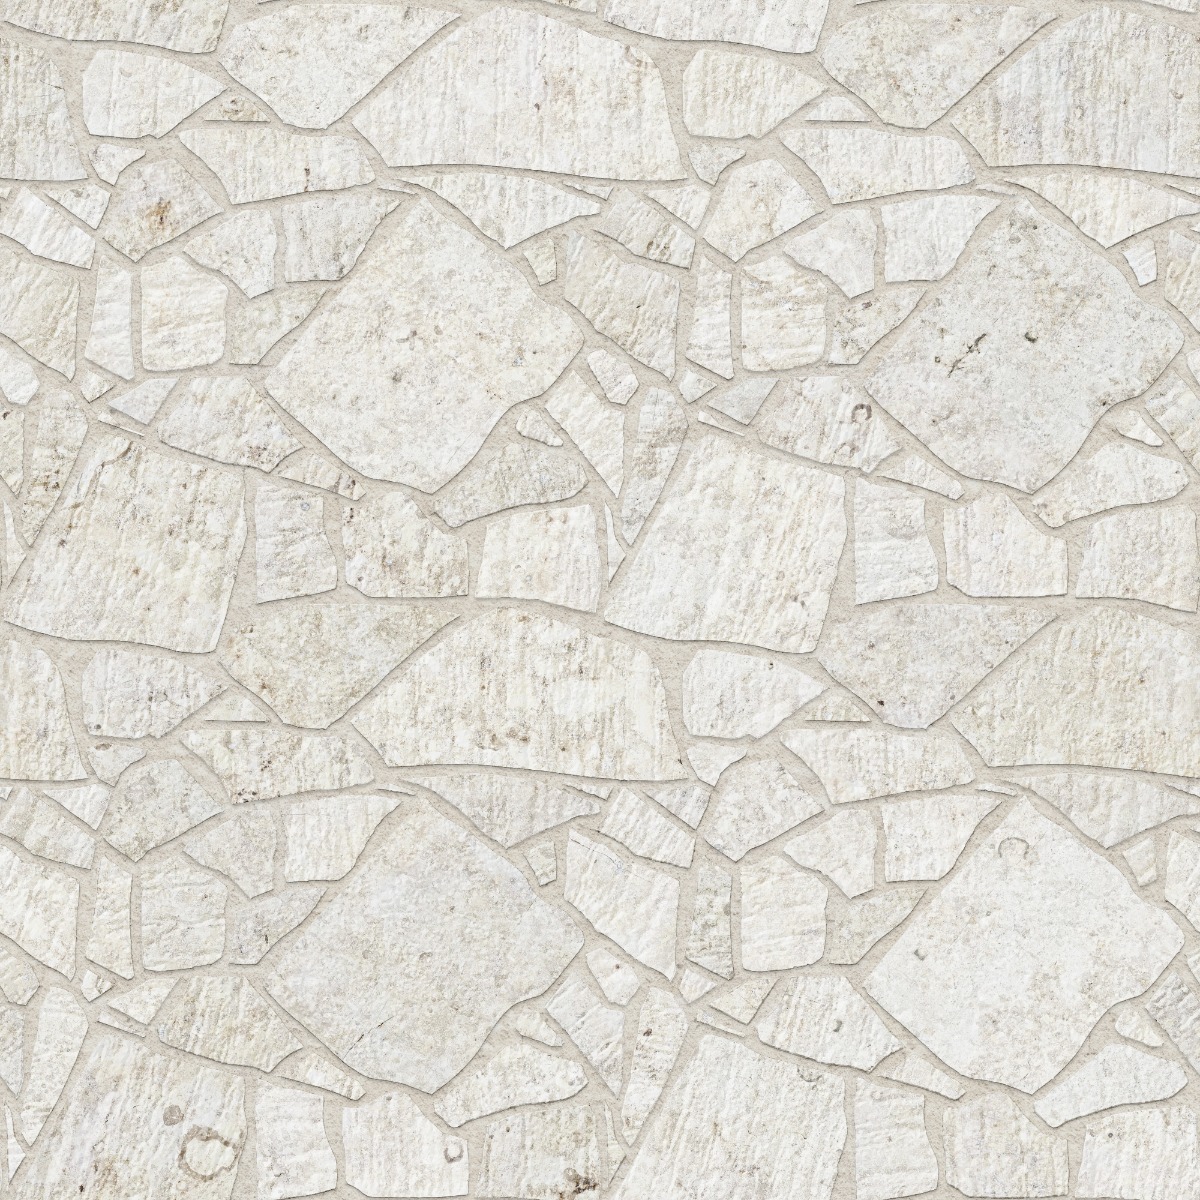 A seamless stone texture with limestone blocks arranged in a Crazy Paving pattern